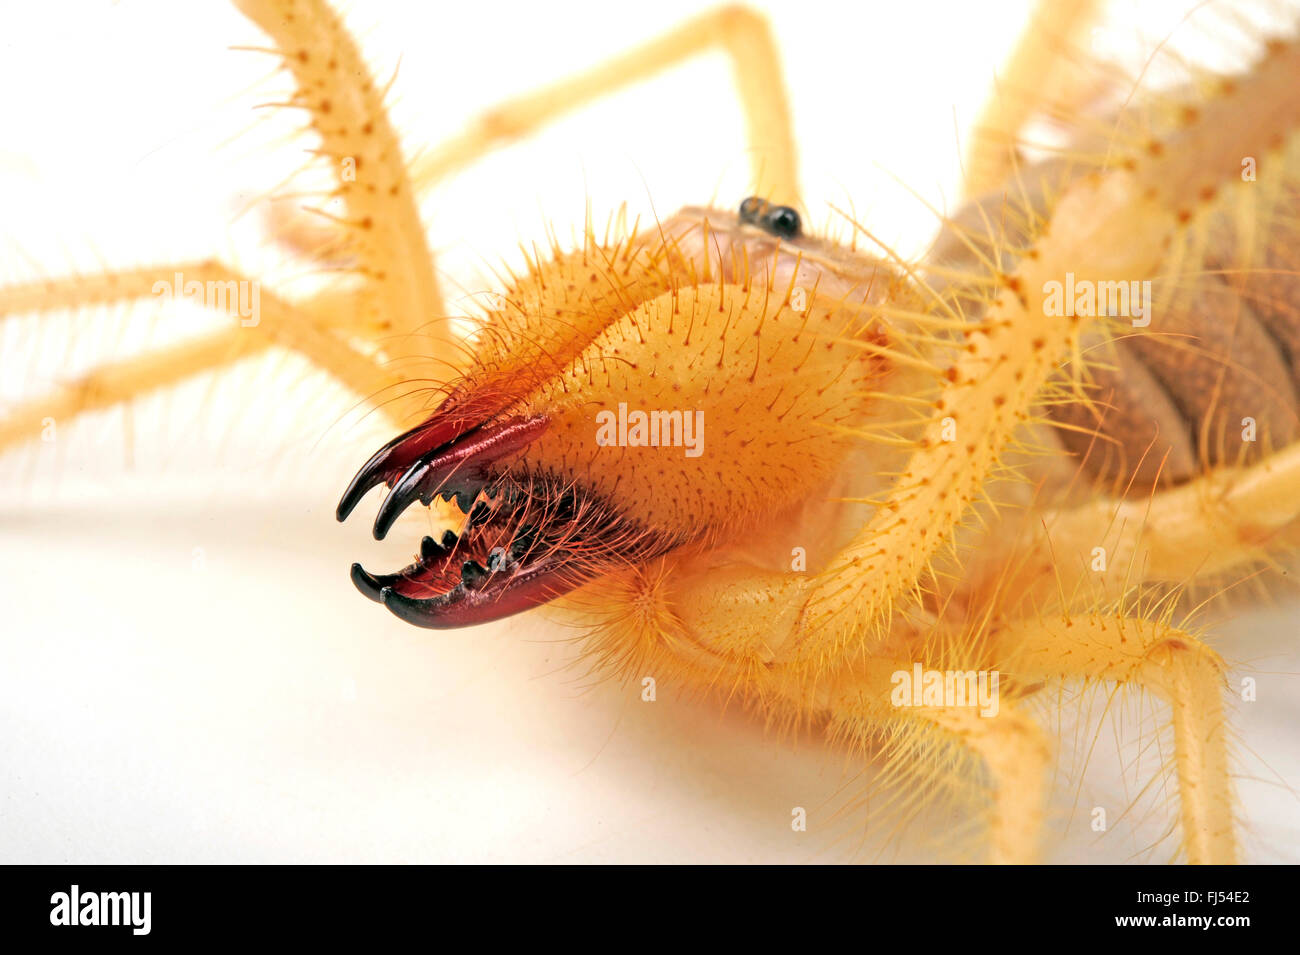 Camel spiders, Wind scorpions, Sun spiders, Solifuges (Galeodes granti), portrait, cut-out Stock Photo